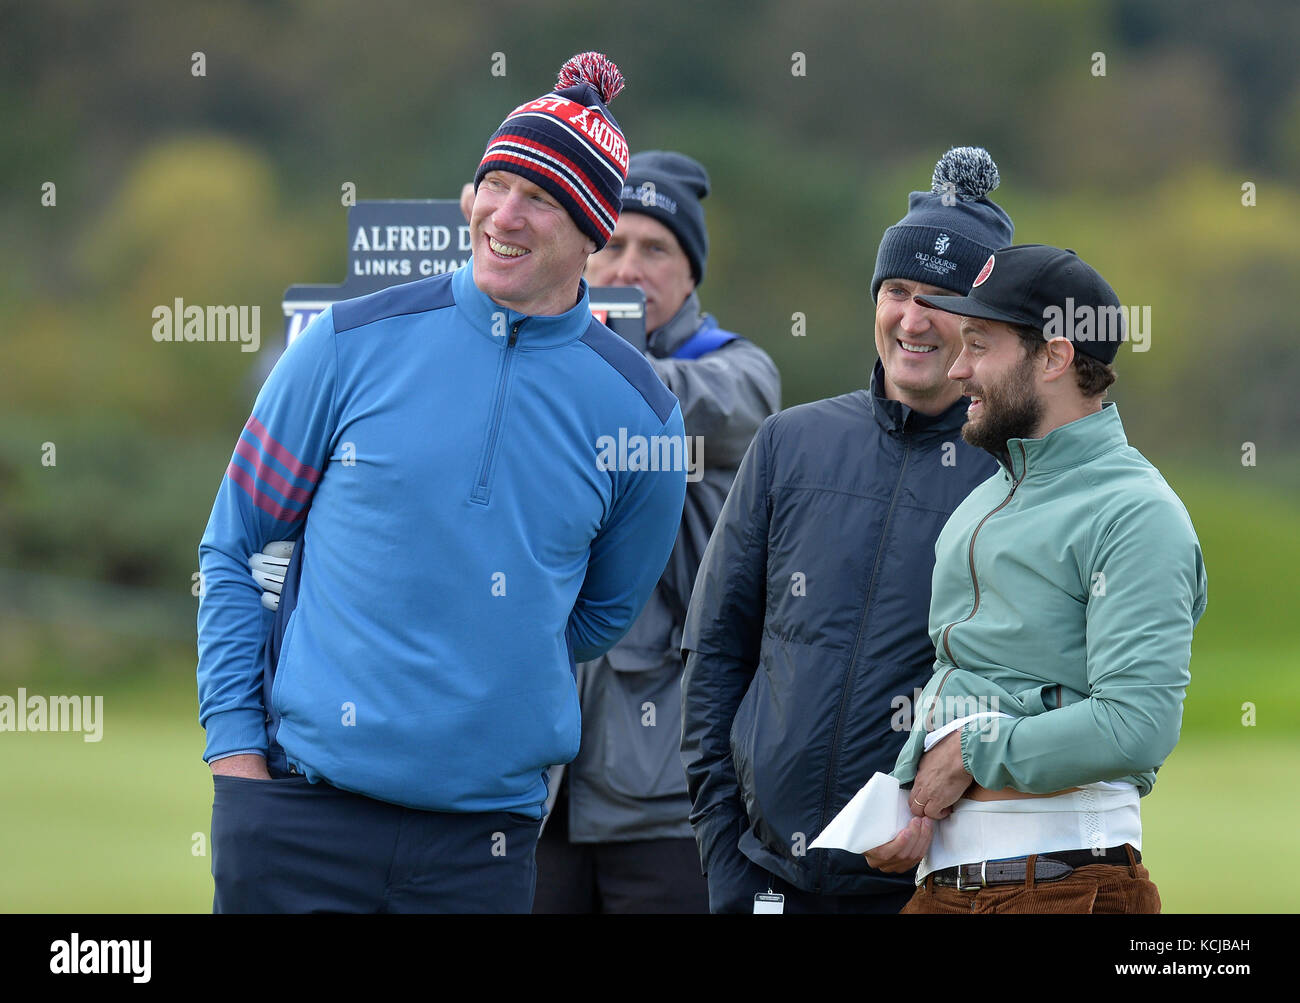 Jamie Dornan (right) during day one of the Alfred Dunhill Links Championship at St Andrews. Stock Photo